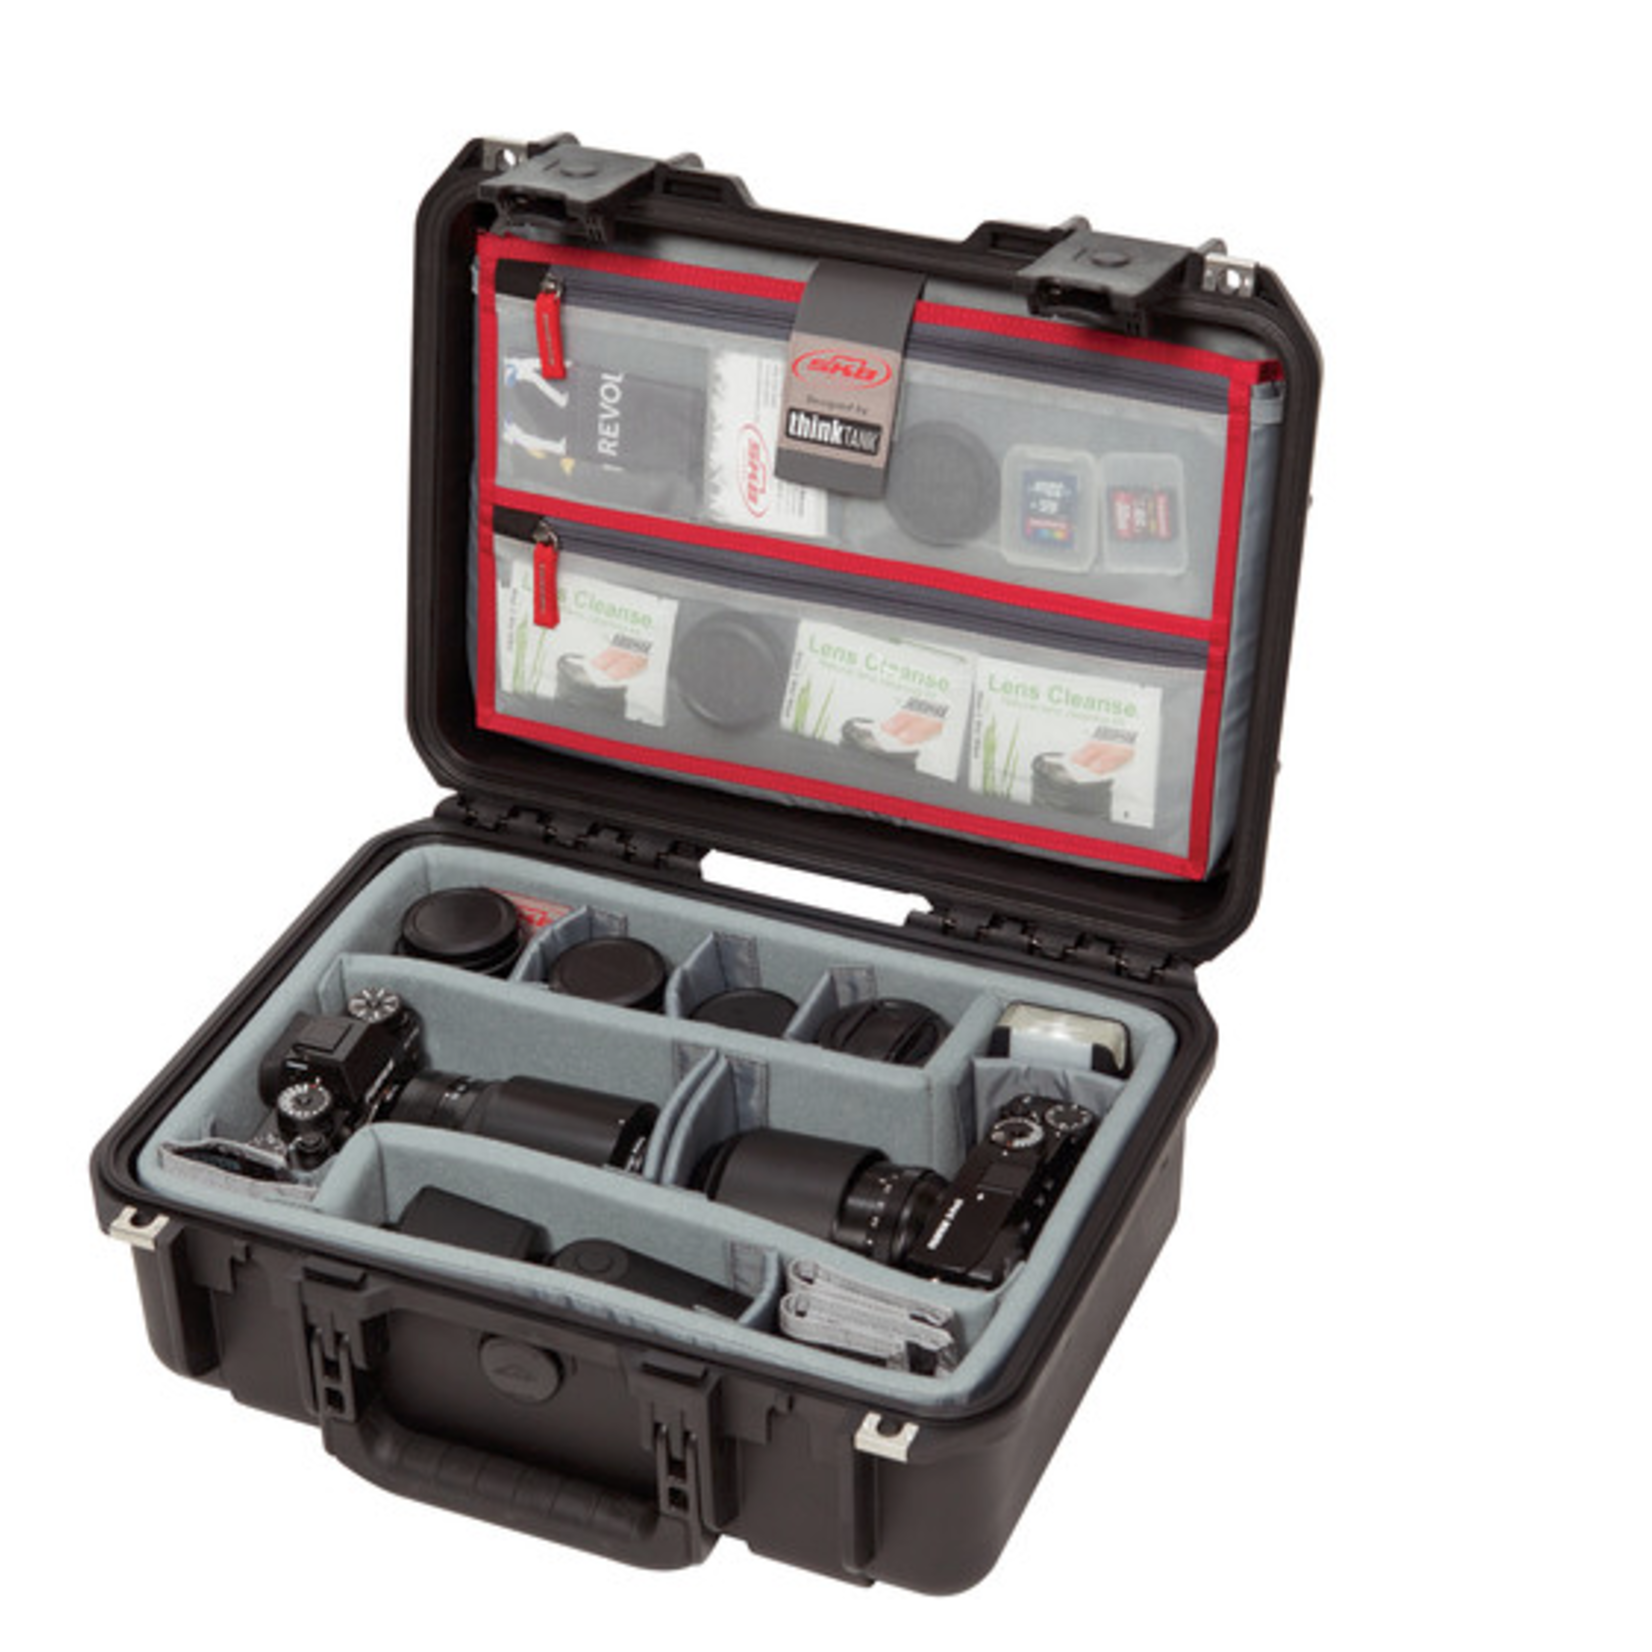 SKB Cases SKB iSeries 1510-6 Case with Think Tank Photo Dividers & Lid Organizer (Black)